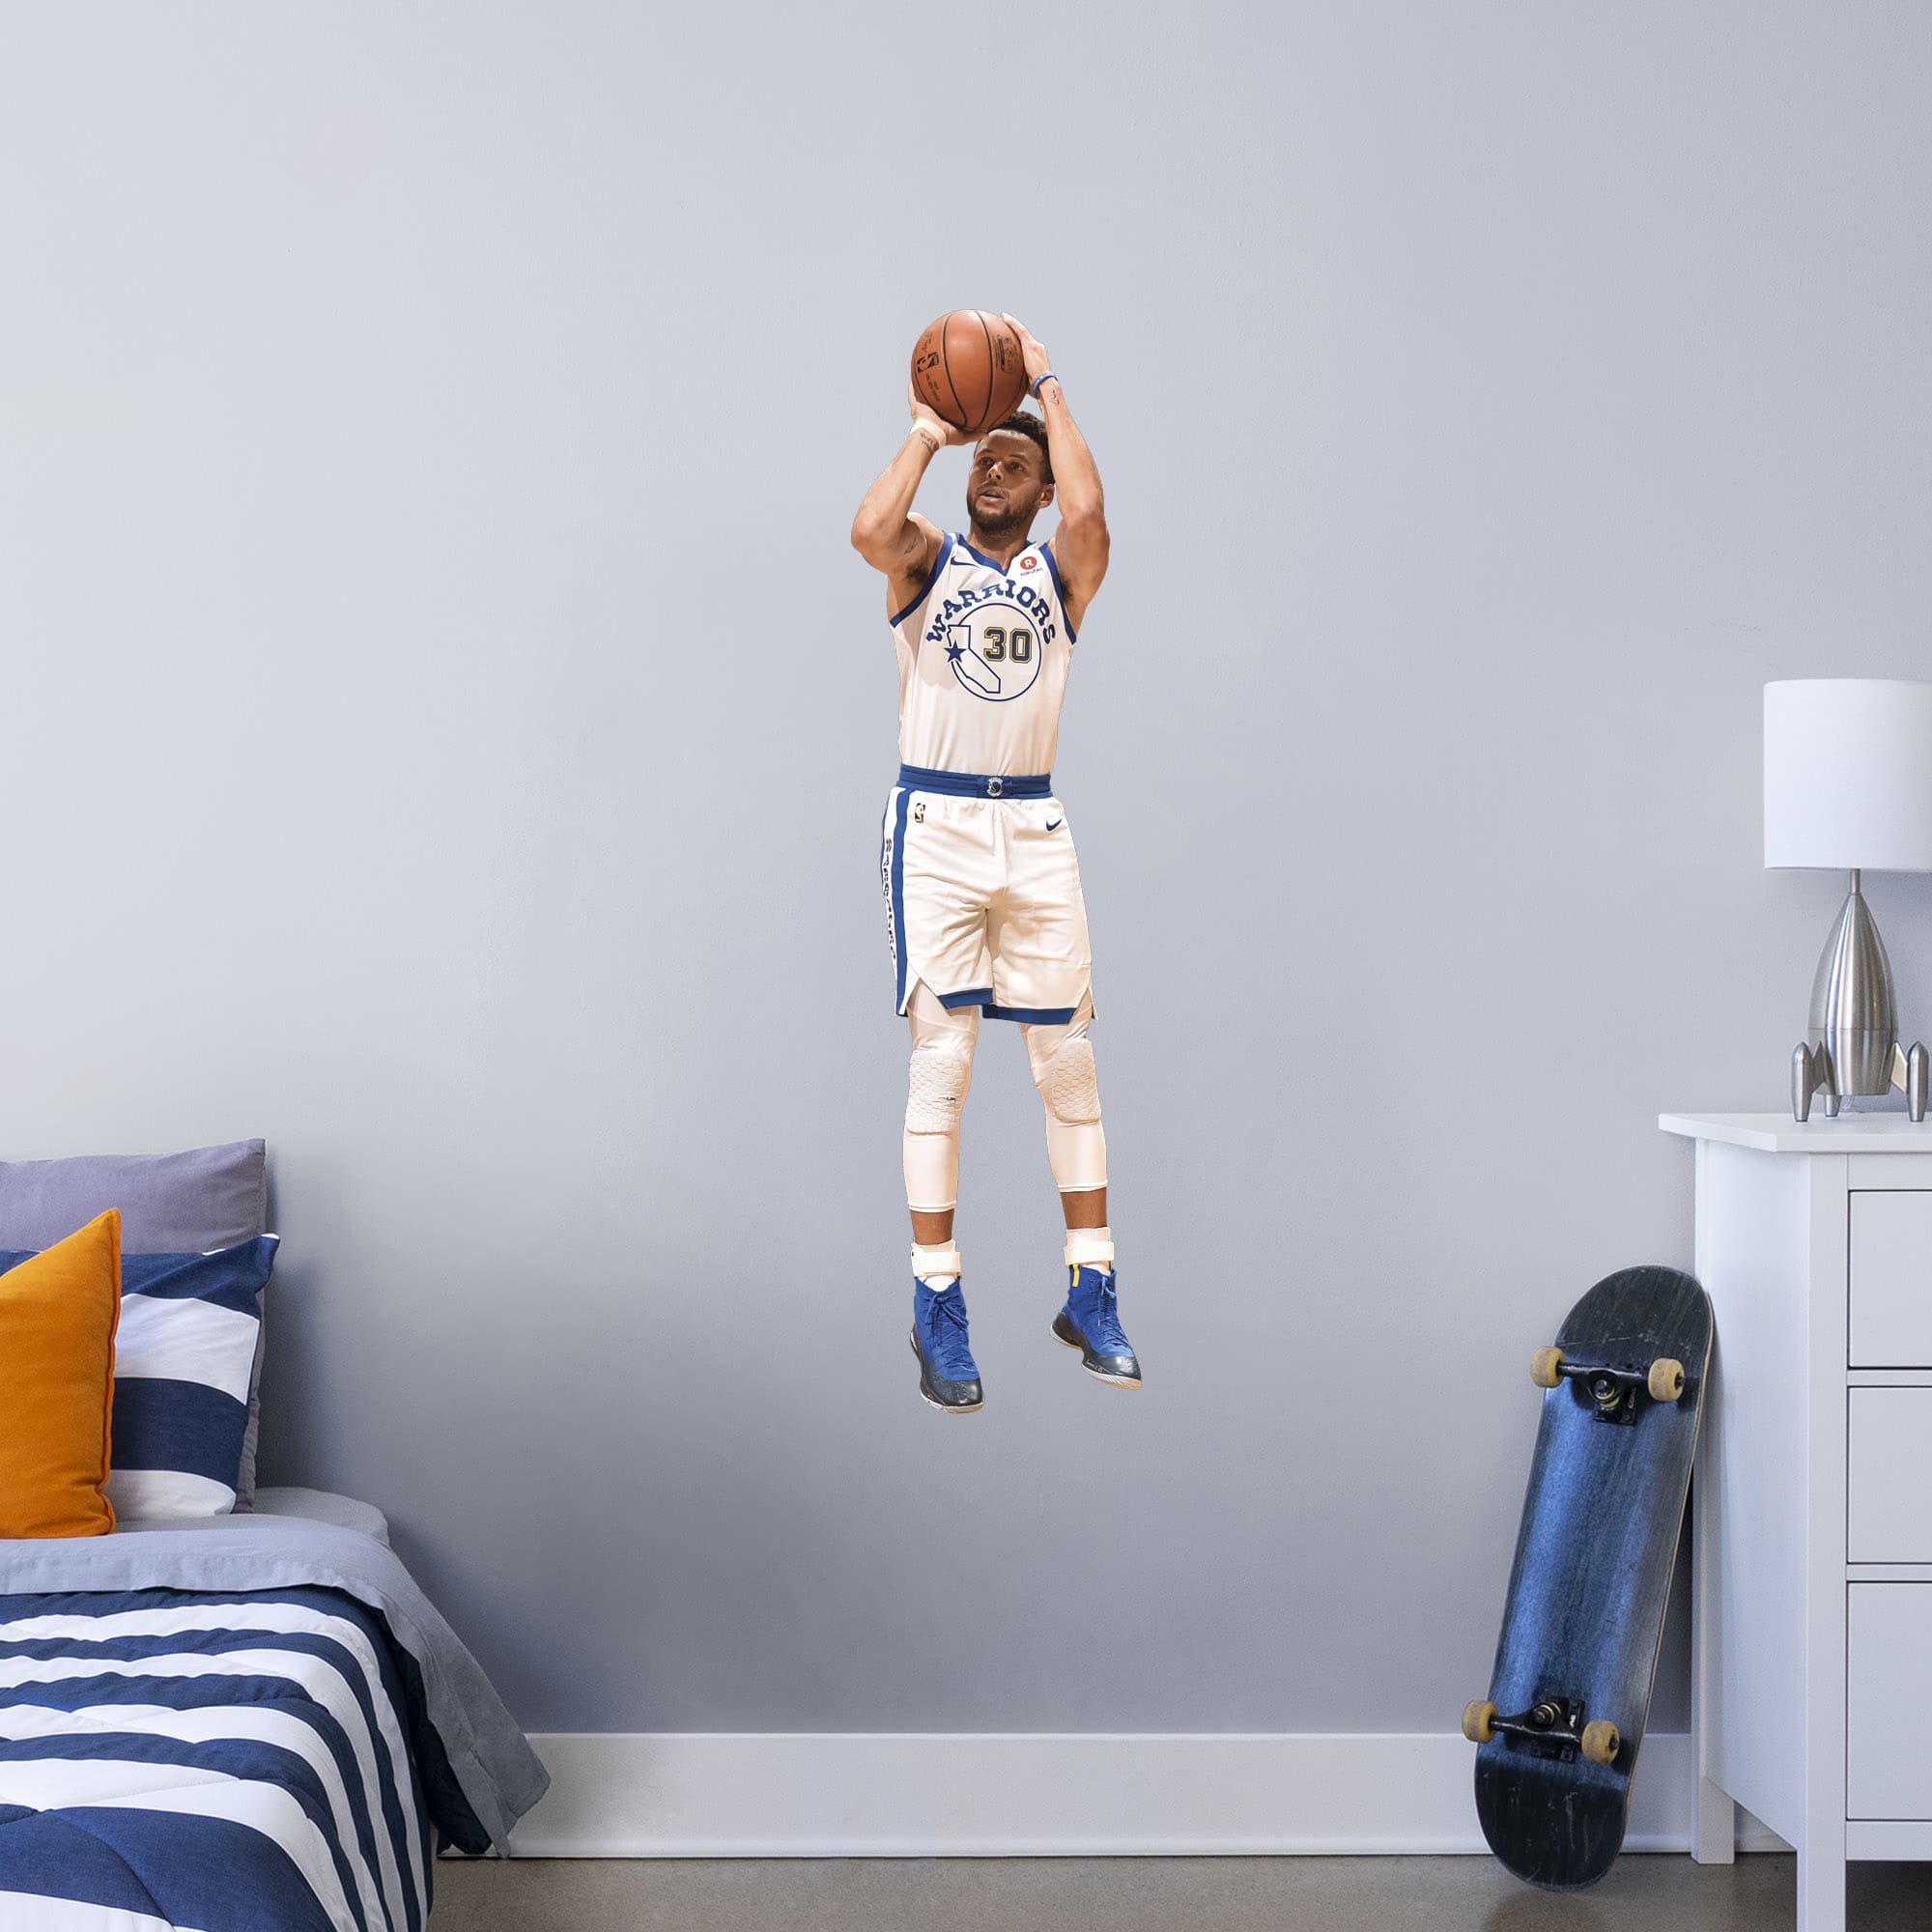 Stephen Curry for Golden State Warriors: Shooting - Officially Licensed NBA Removable Wall Decal Giant Athlete + 2 Decals (15"W